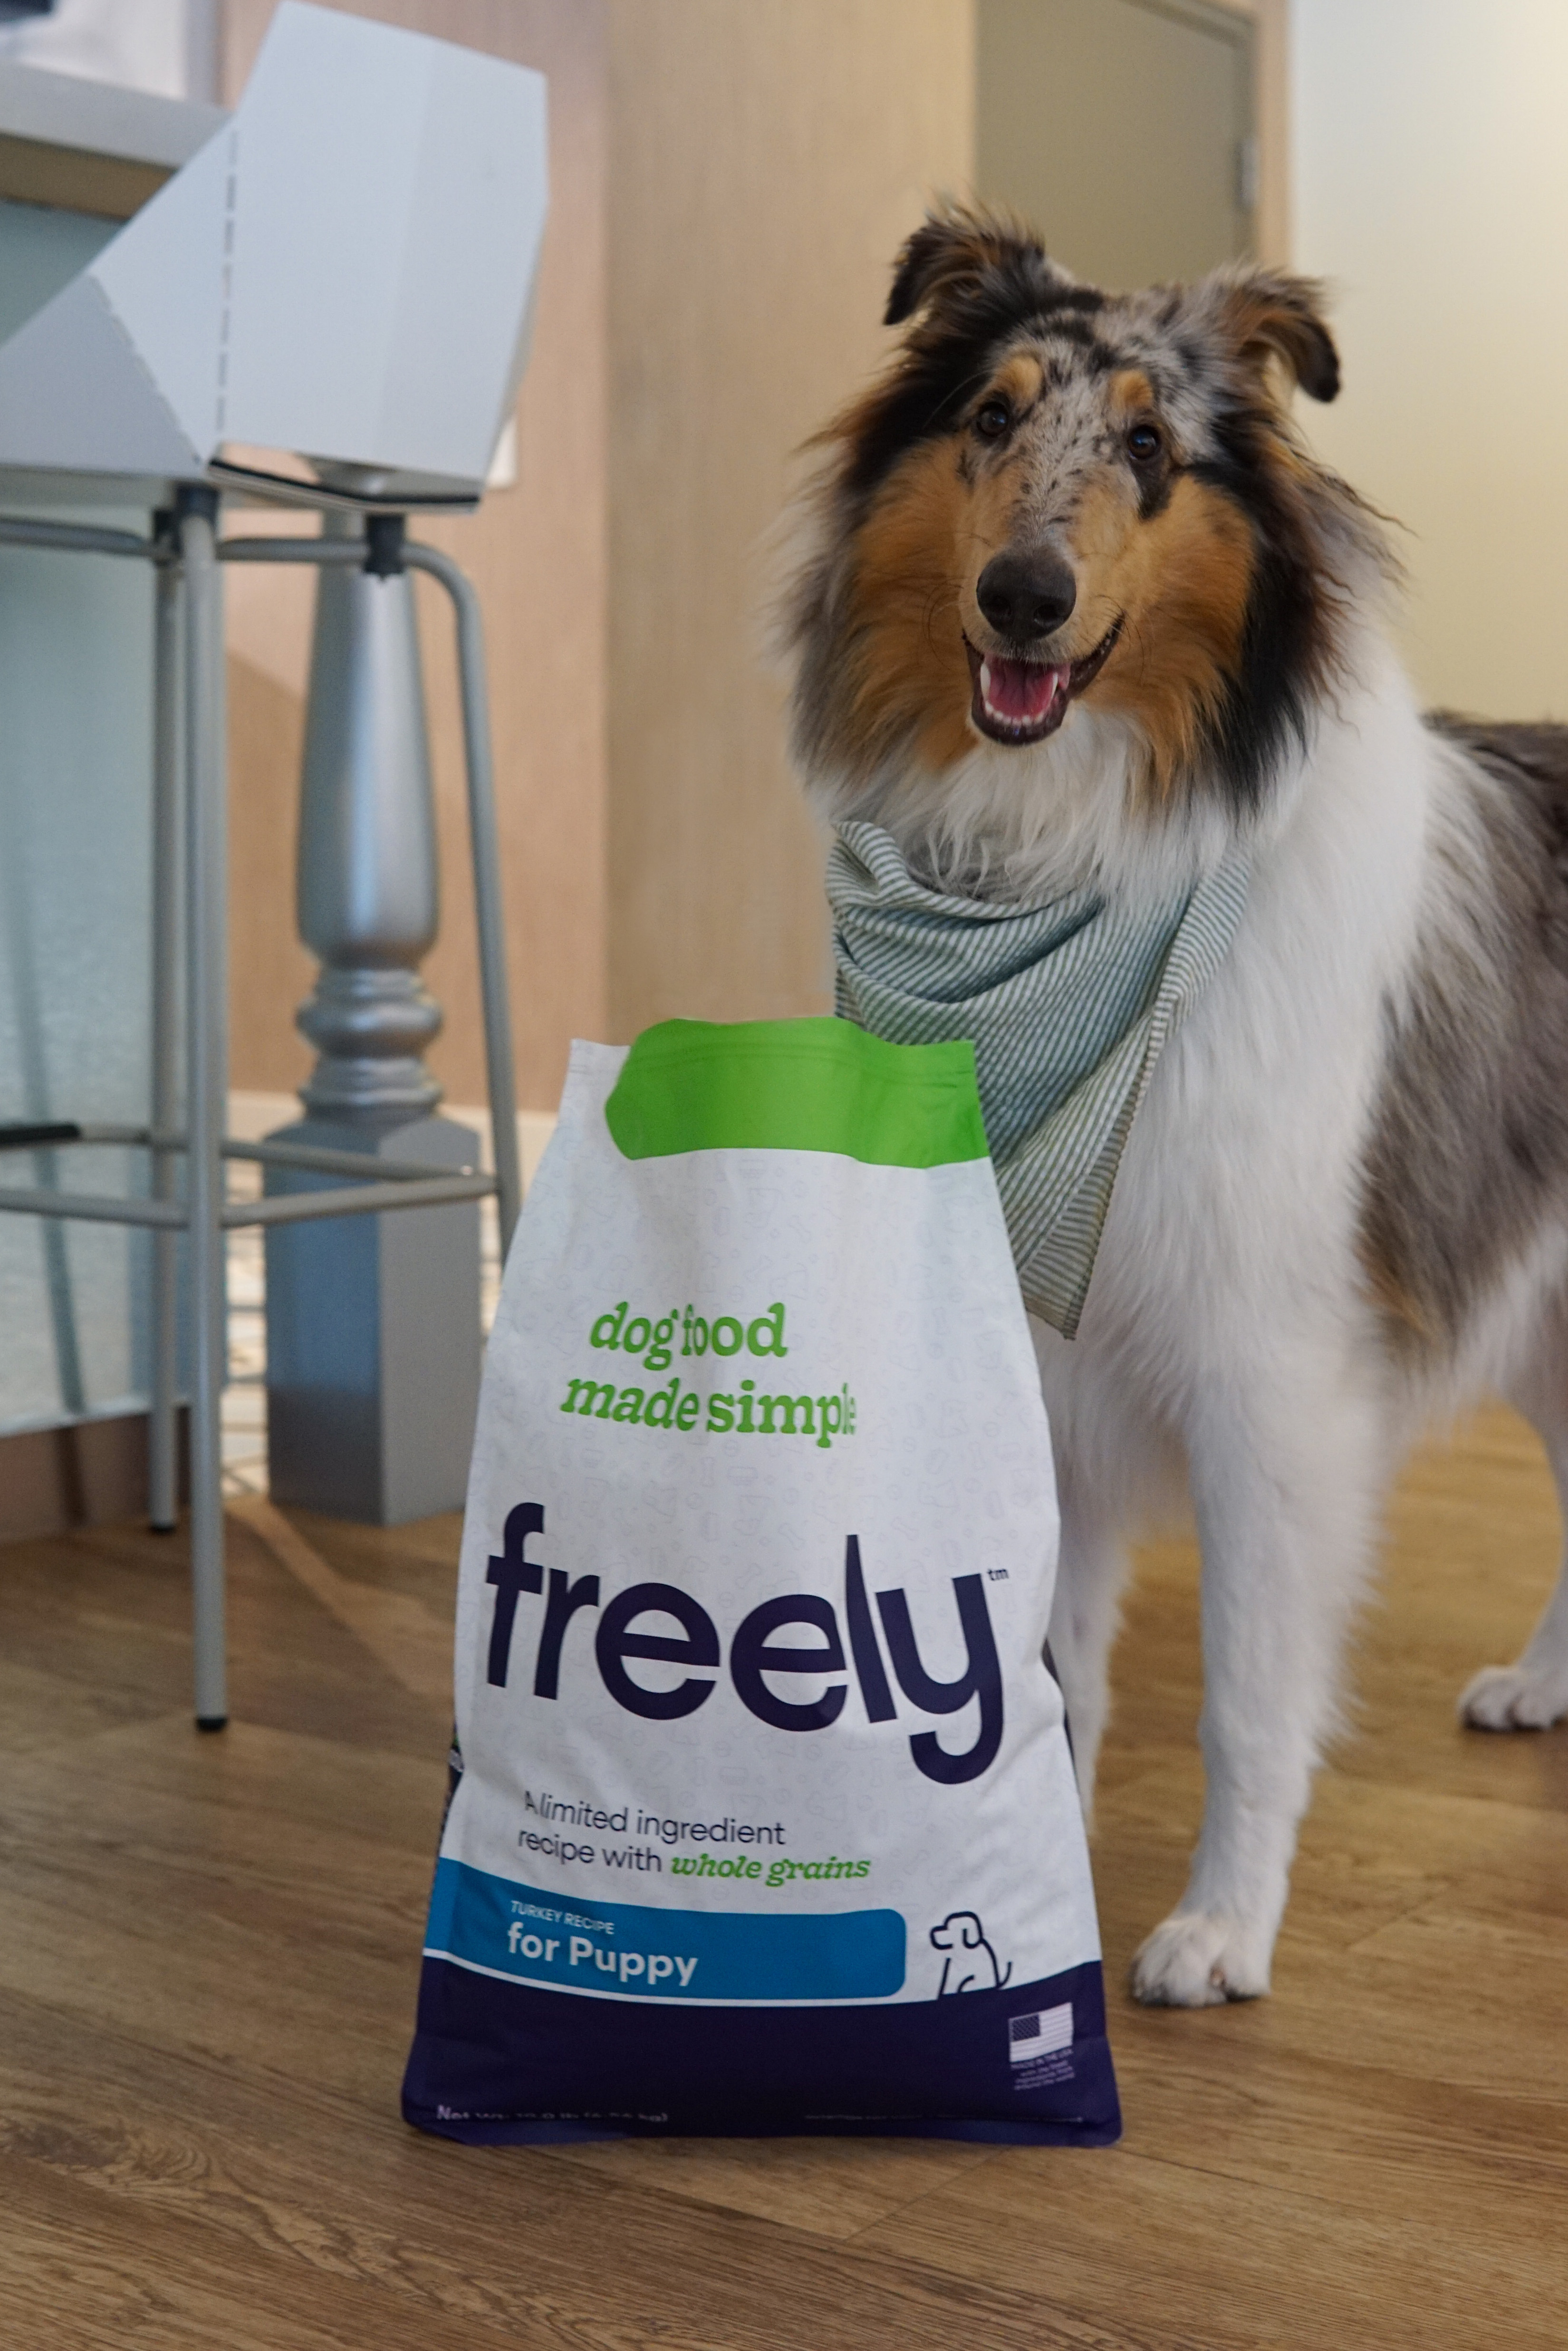 Freely Puppy Whole-Grain Recipe Will Be Served at All Best Friends Pet Hotels Beginning Oct. 1, 2020.